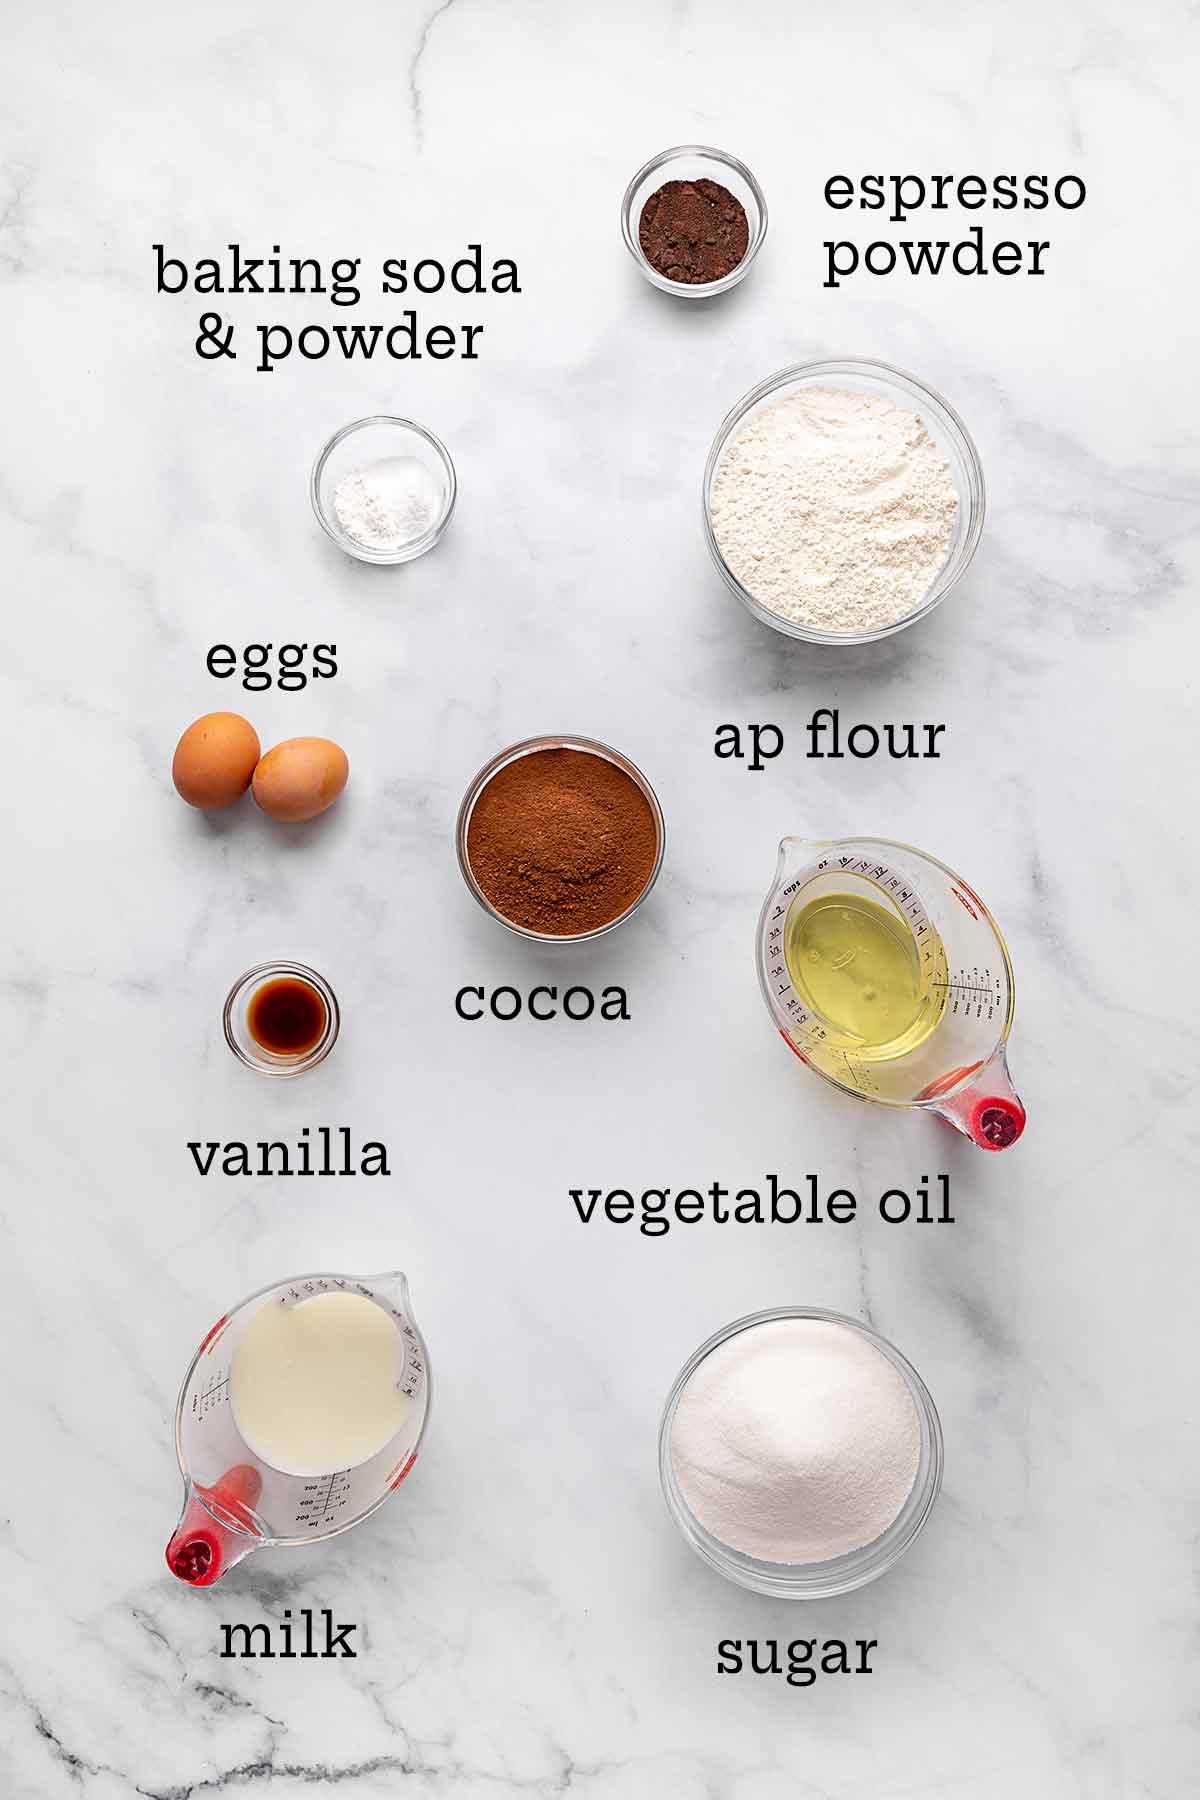 Ingredients for Hershey's chocolate cake--flour, sugar, cocoa, oil, milk, vanilla, eggs, baking soda and powder, and espresso.